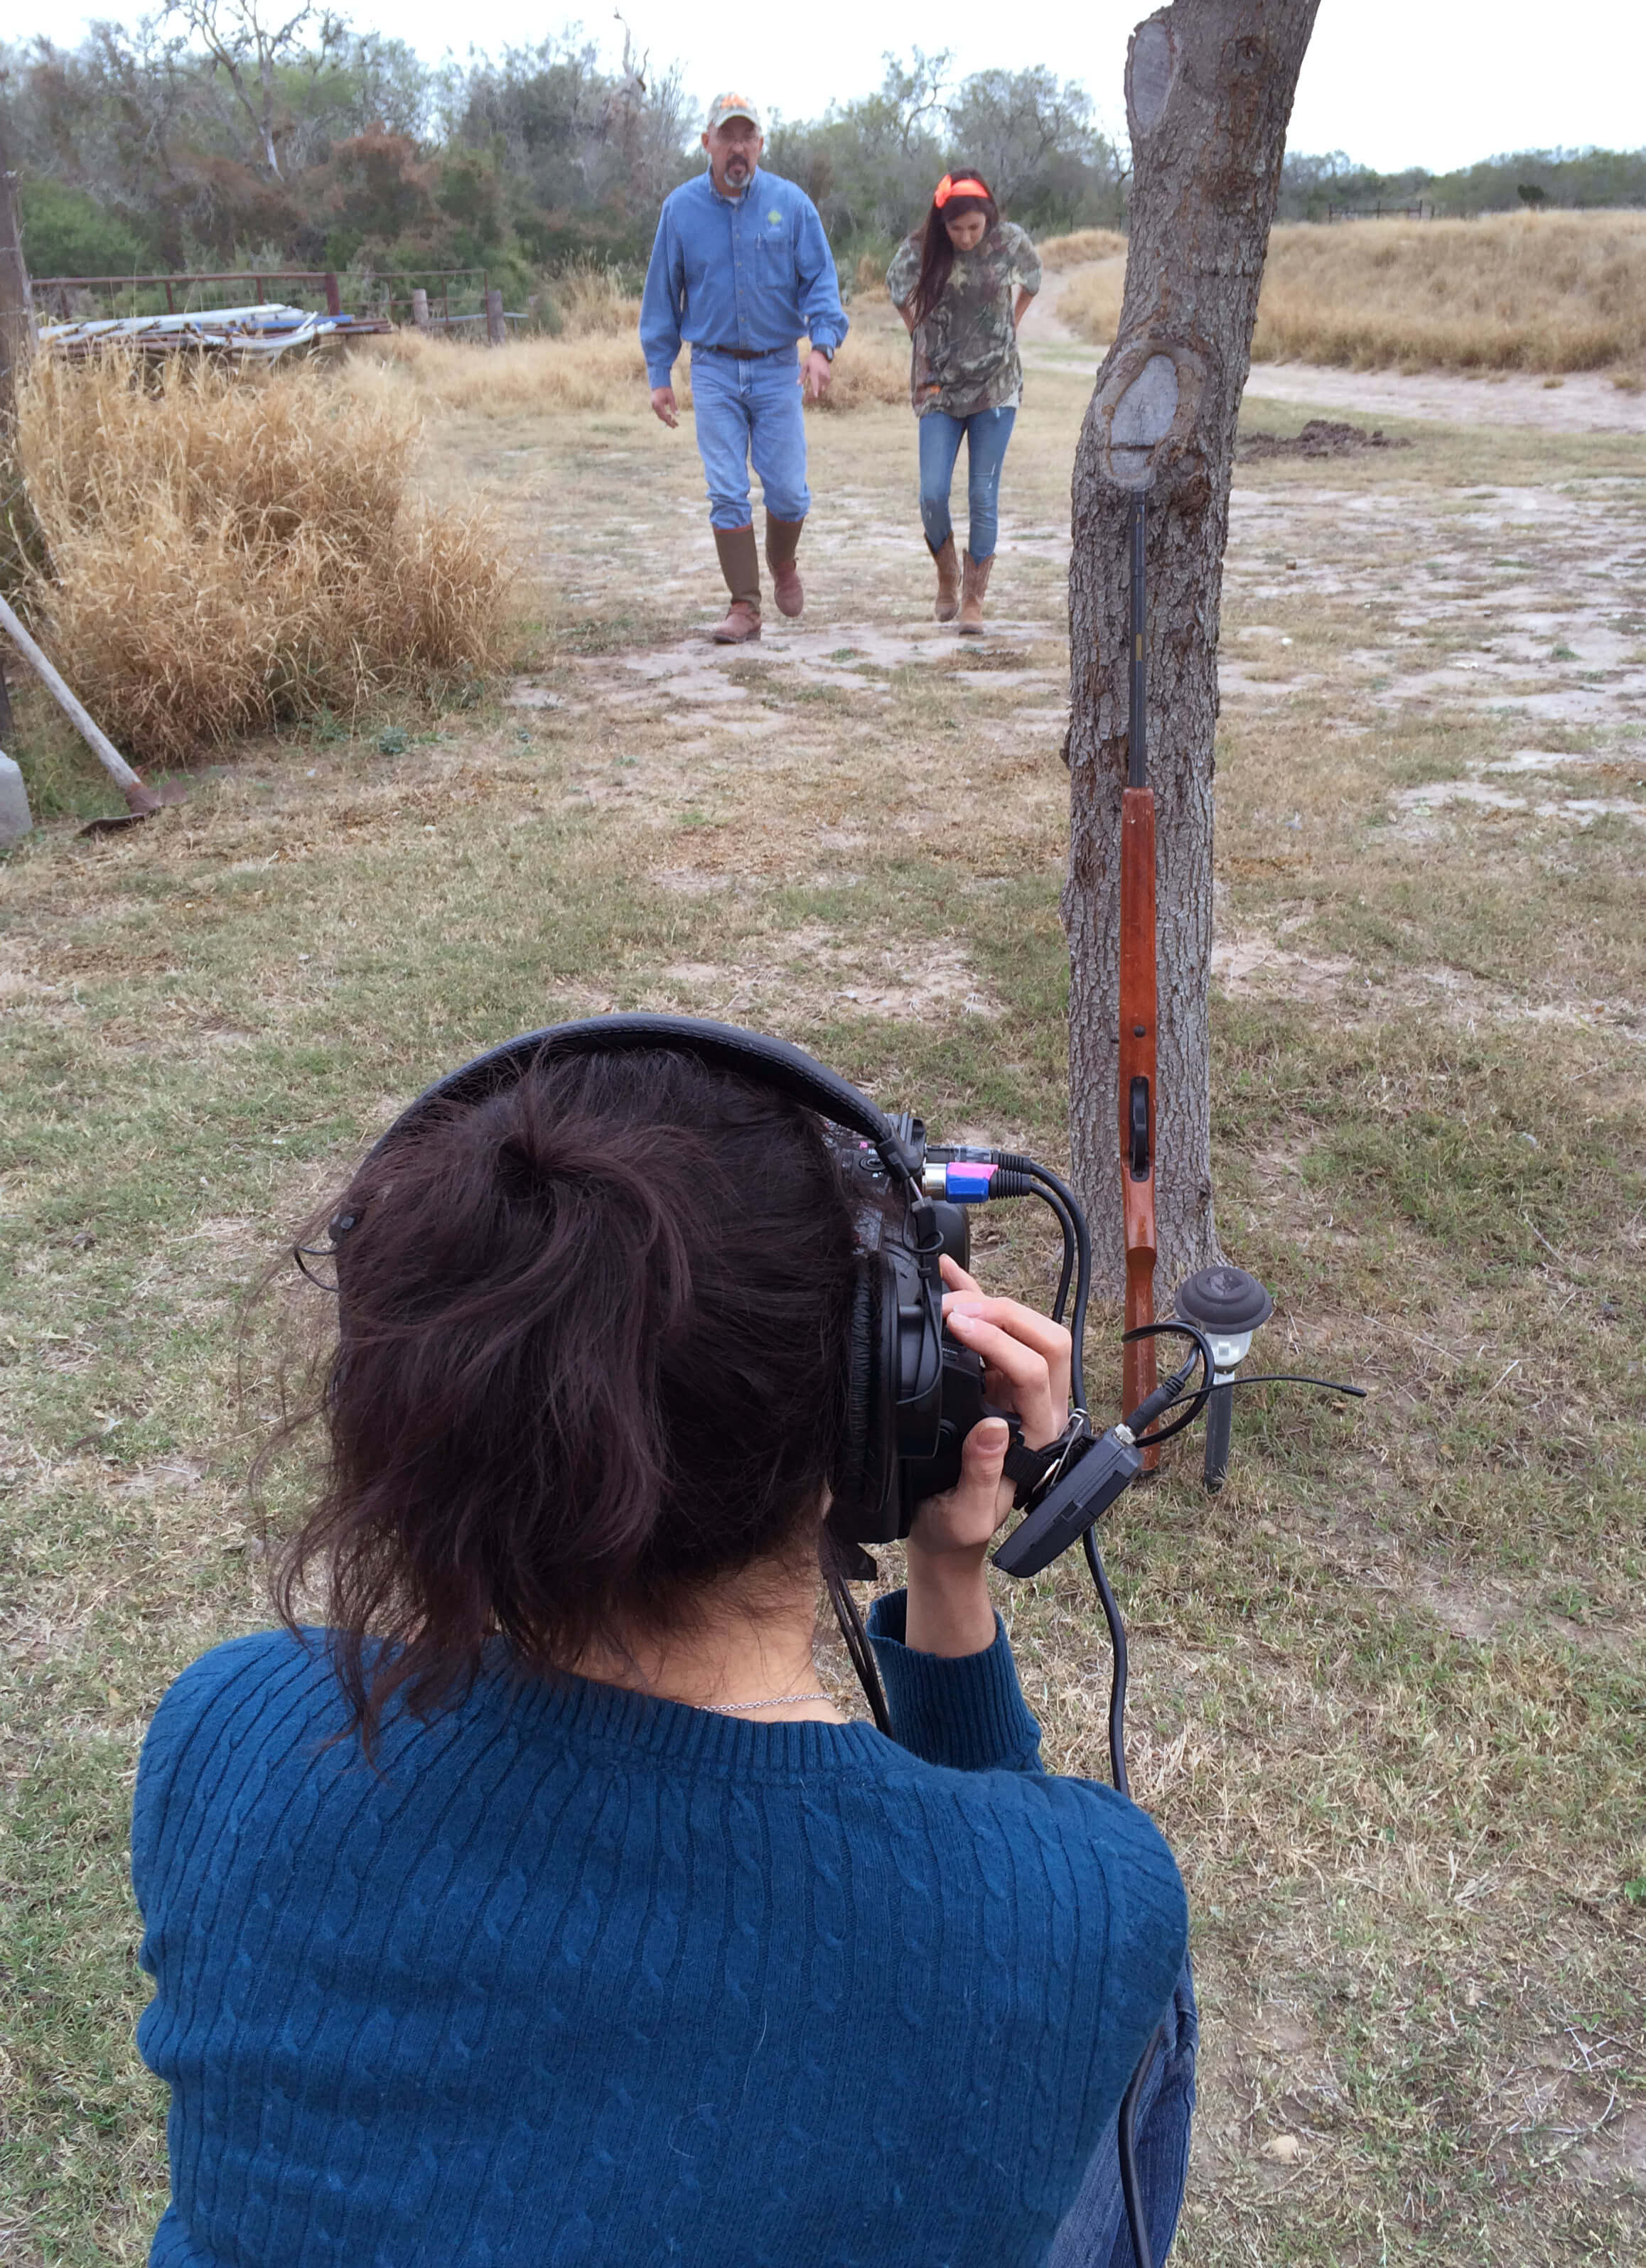 Production still from Hot Girls Wanted. A woman is seen from behind, and she is wearing headphones and holding a camera that is pointed in front of her towards a man and an adolescent girl walking side by side.